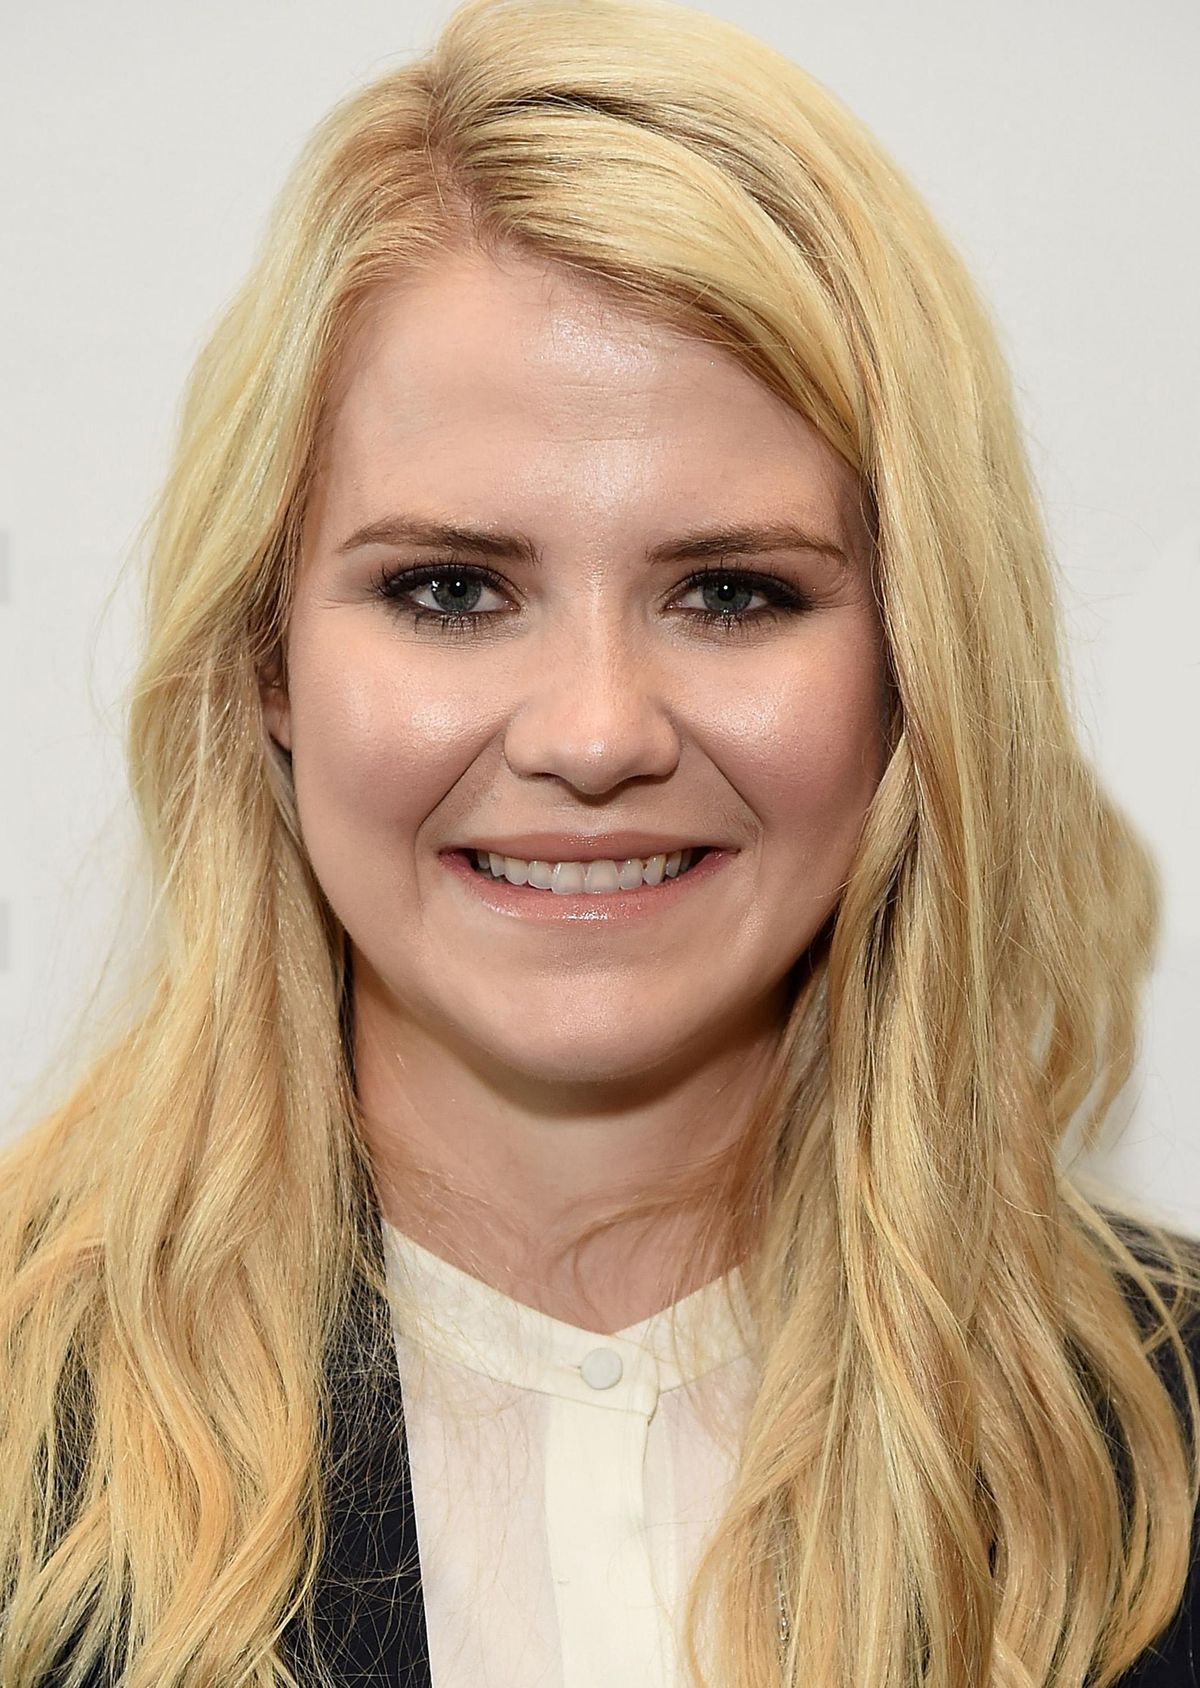 Narrator/producer Elizabeth Smart of "I Am Elizabeth Smart," a docu-drama about her abduction 15 years ago which will premiere on Lifetime Saturday. (Lifetime Television) (Lifetime Television / TNS)